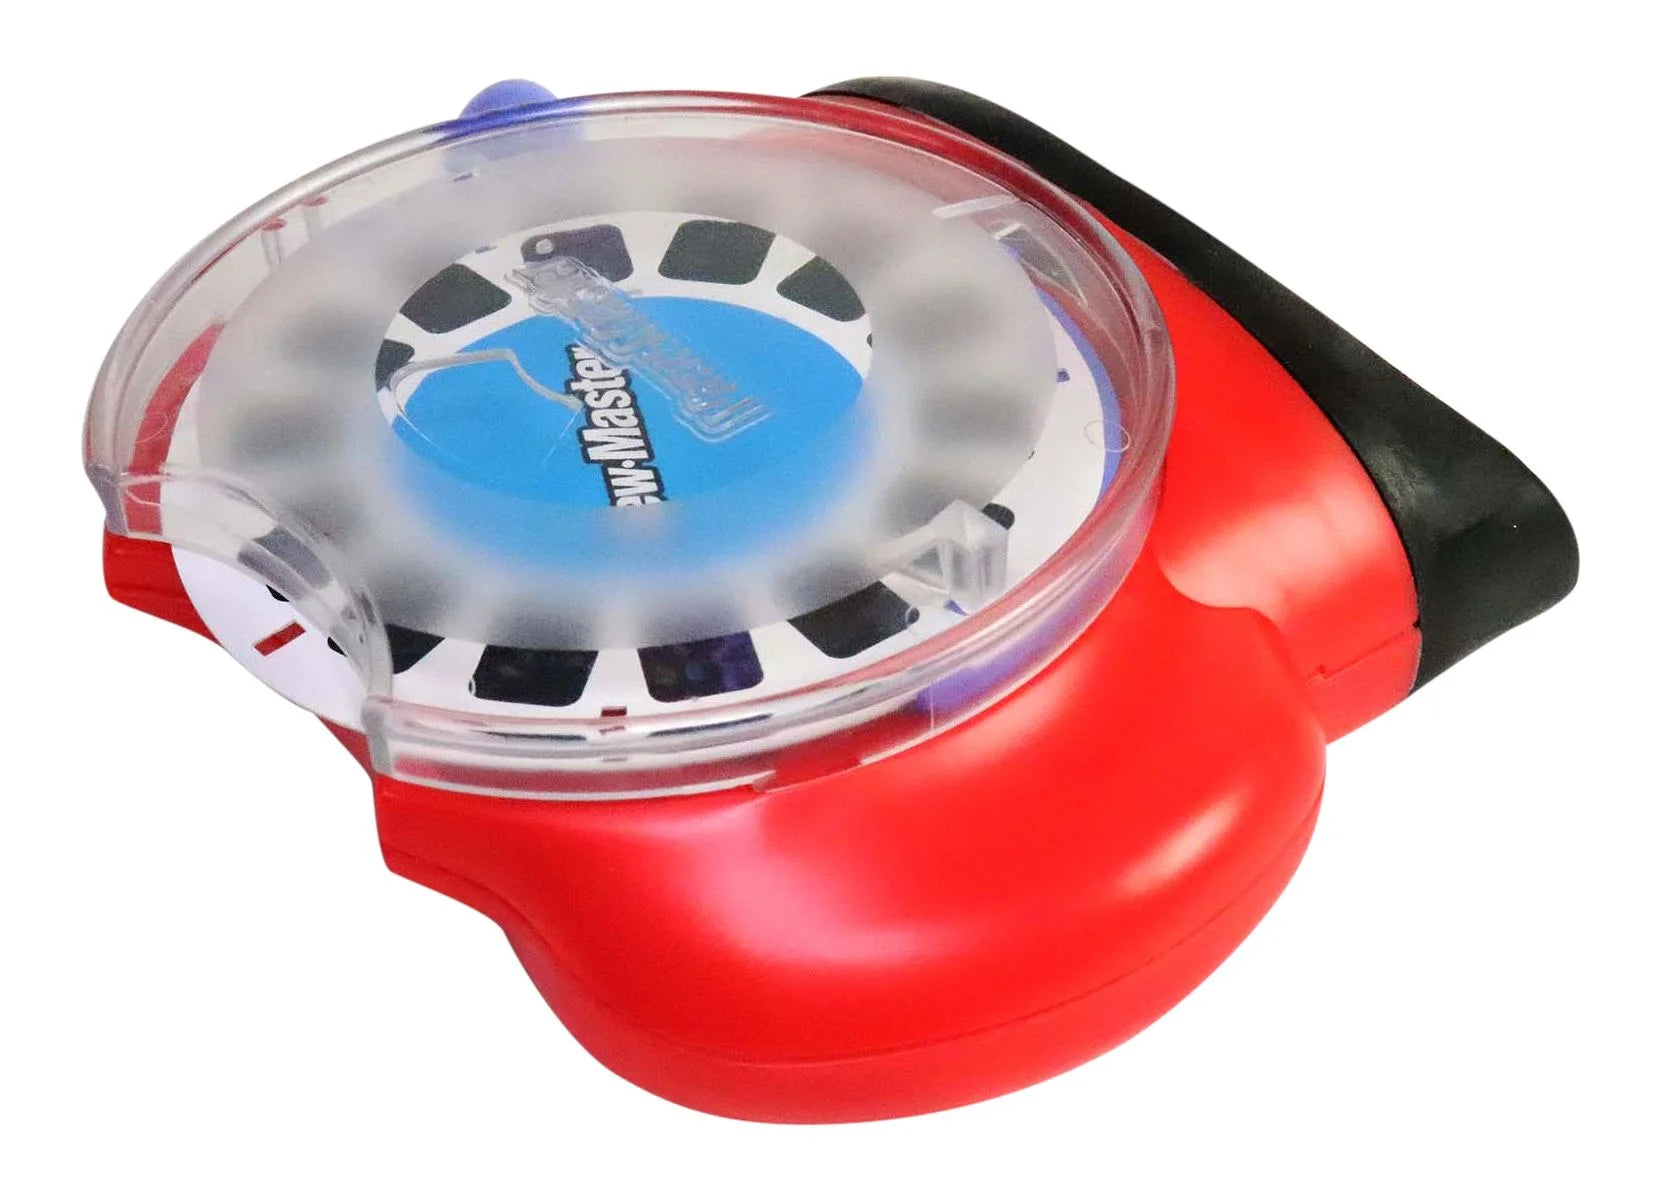 View-Master Model O Viewer - Red - vintage - 1995